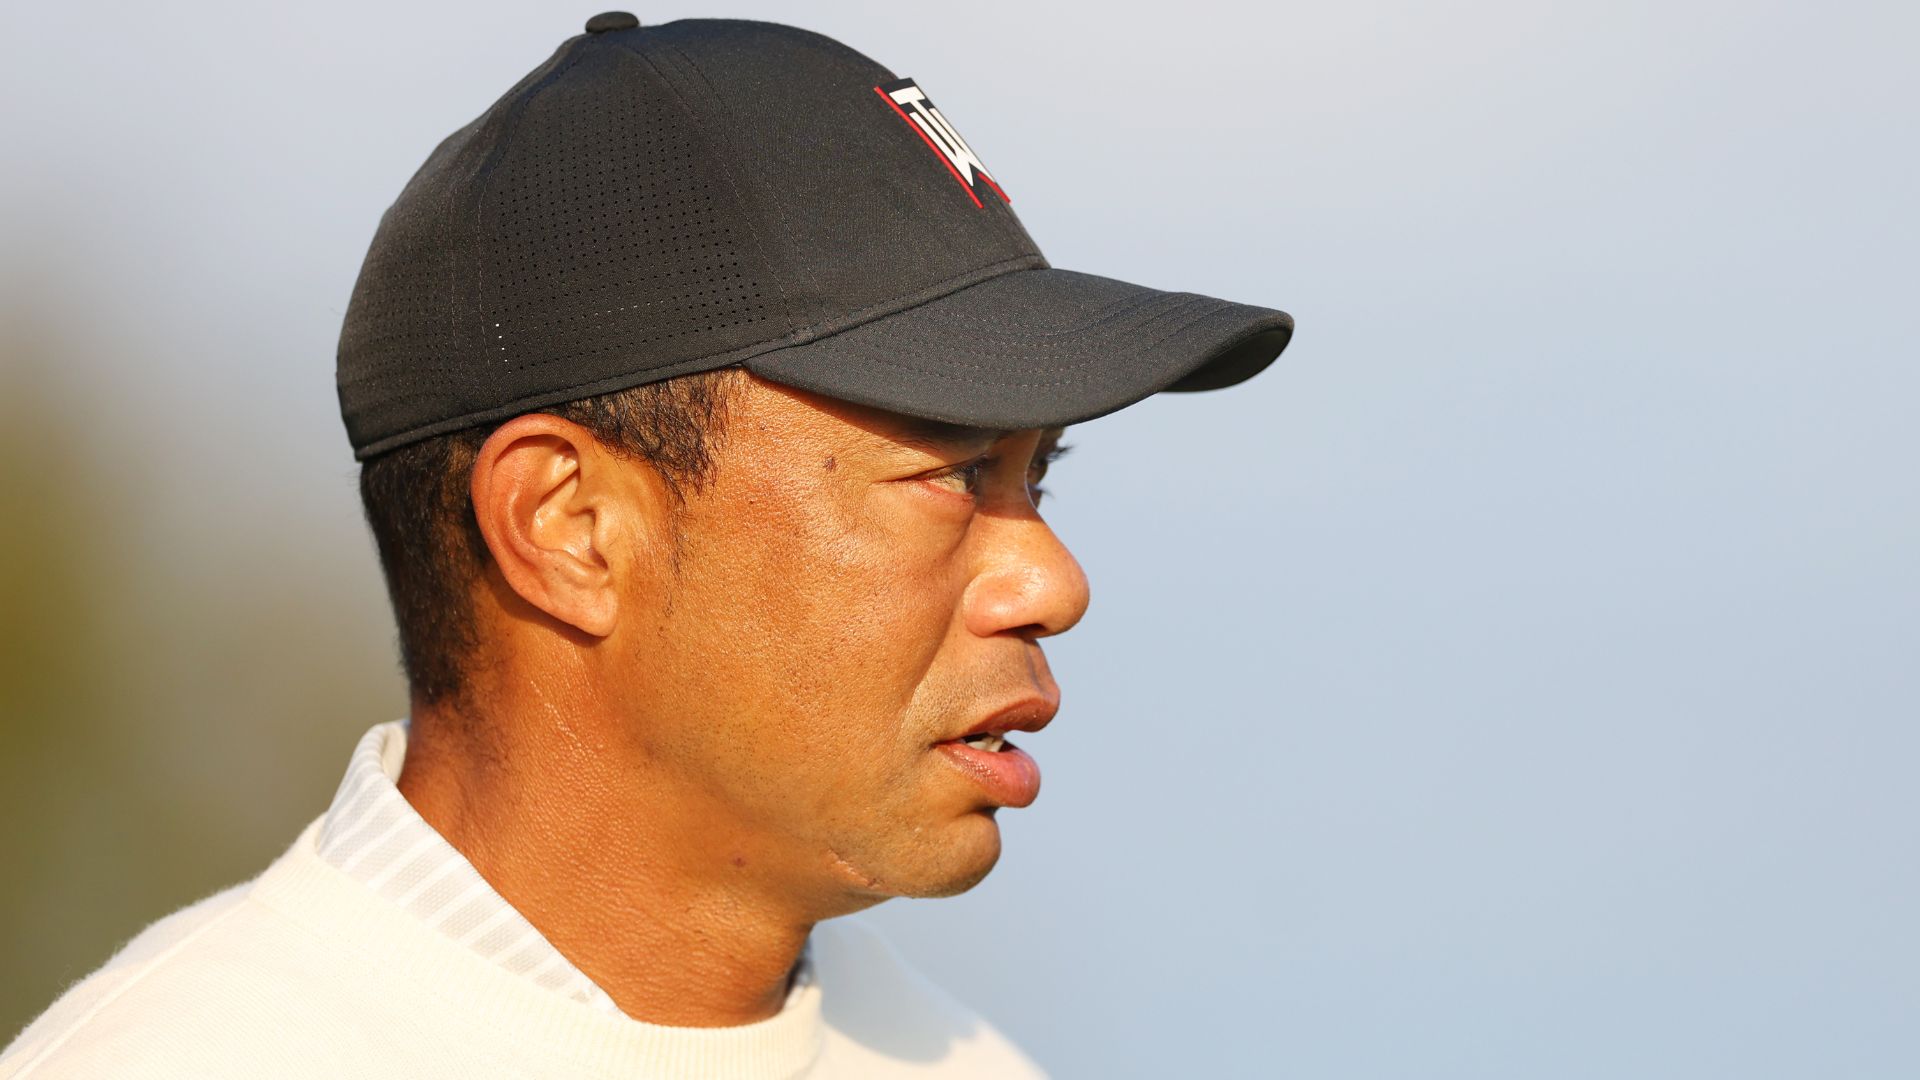 Tiger Woods’ competitive nature keeping him far away from ceremonial status